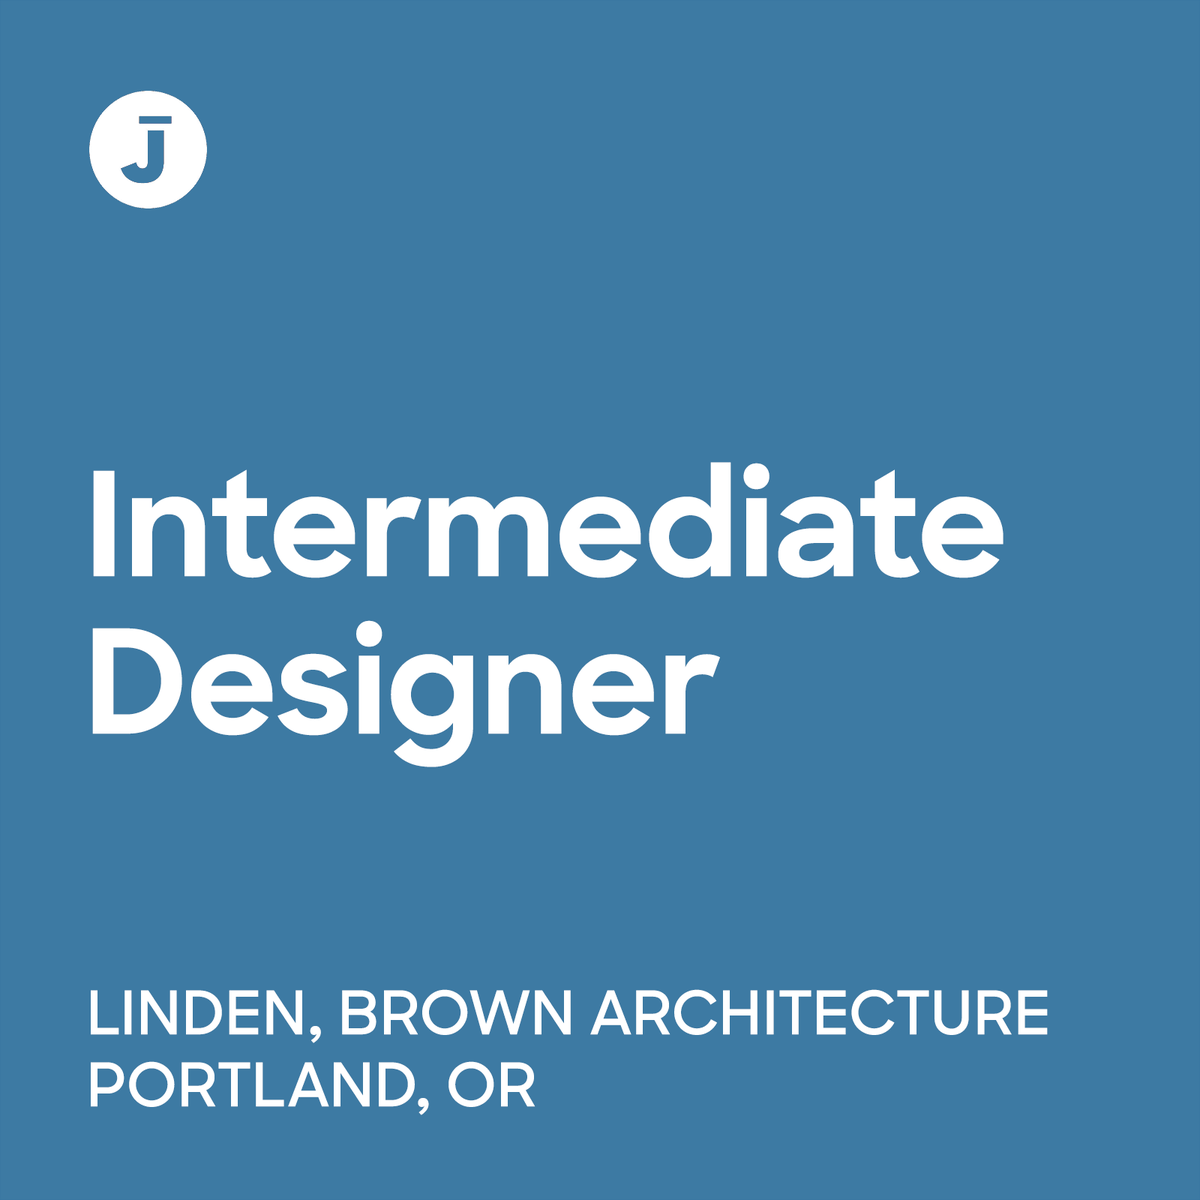 Today's Employer of the Day is Linden, Brown Architecture. They're currently hiring an Intermediate Designer in Portland, Oregon.

arcnct.co/4d6EH9I

#ArchinectJobs #ArchinectEOTD #ArchitectureJobs #PortlandJobs #PDXJobs